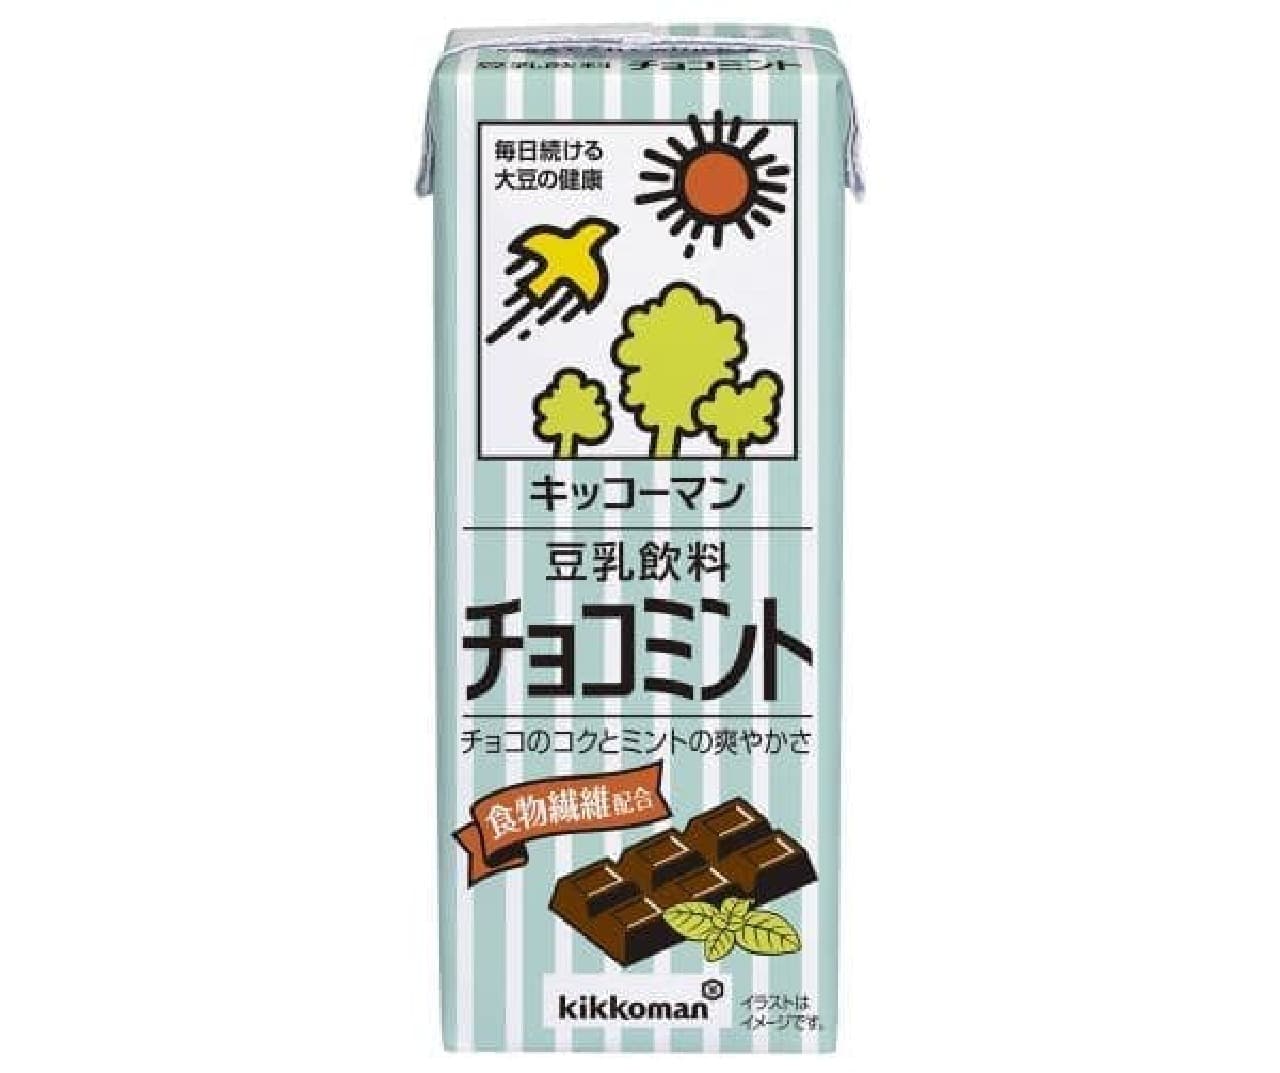 Chocolate mint is a soy milk drink characterized by the richness of chocolate and the refreshing aroma of mint.